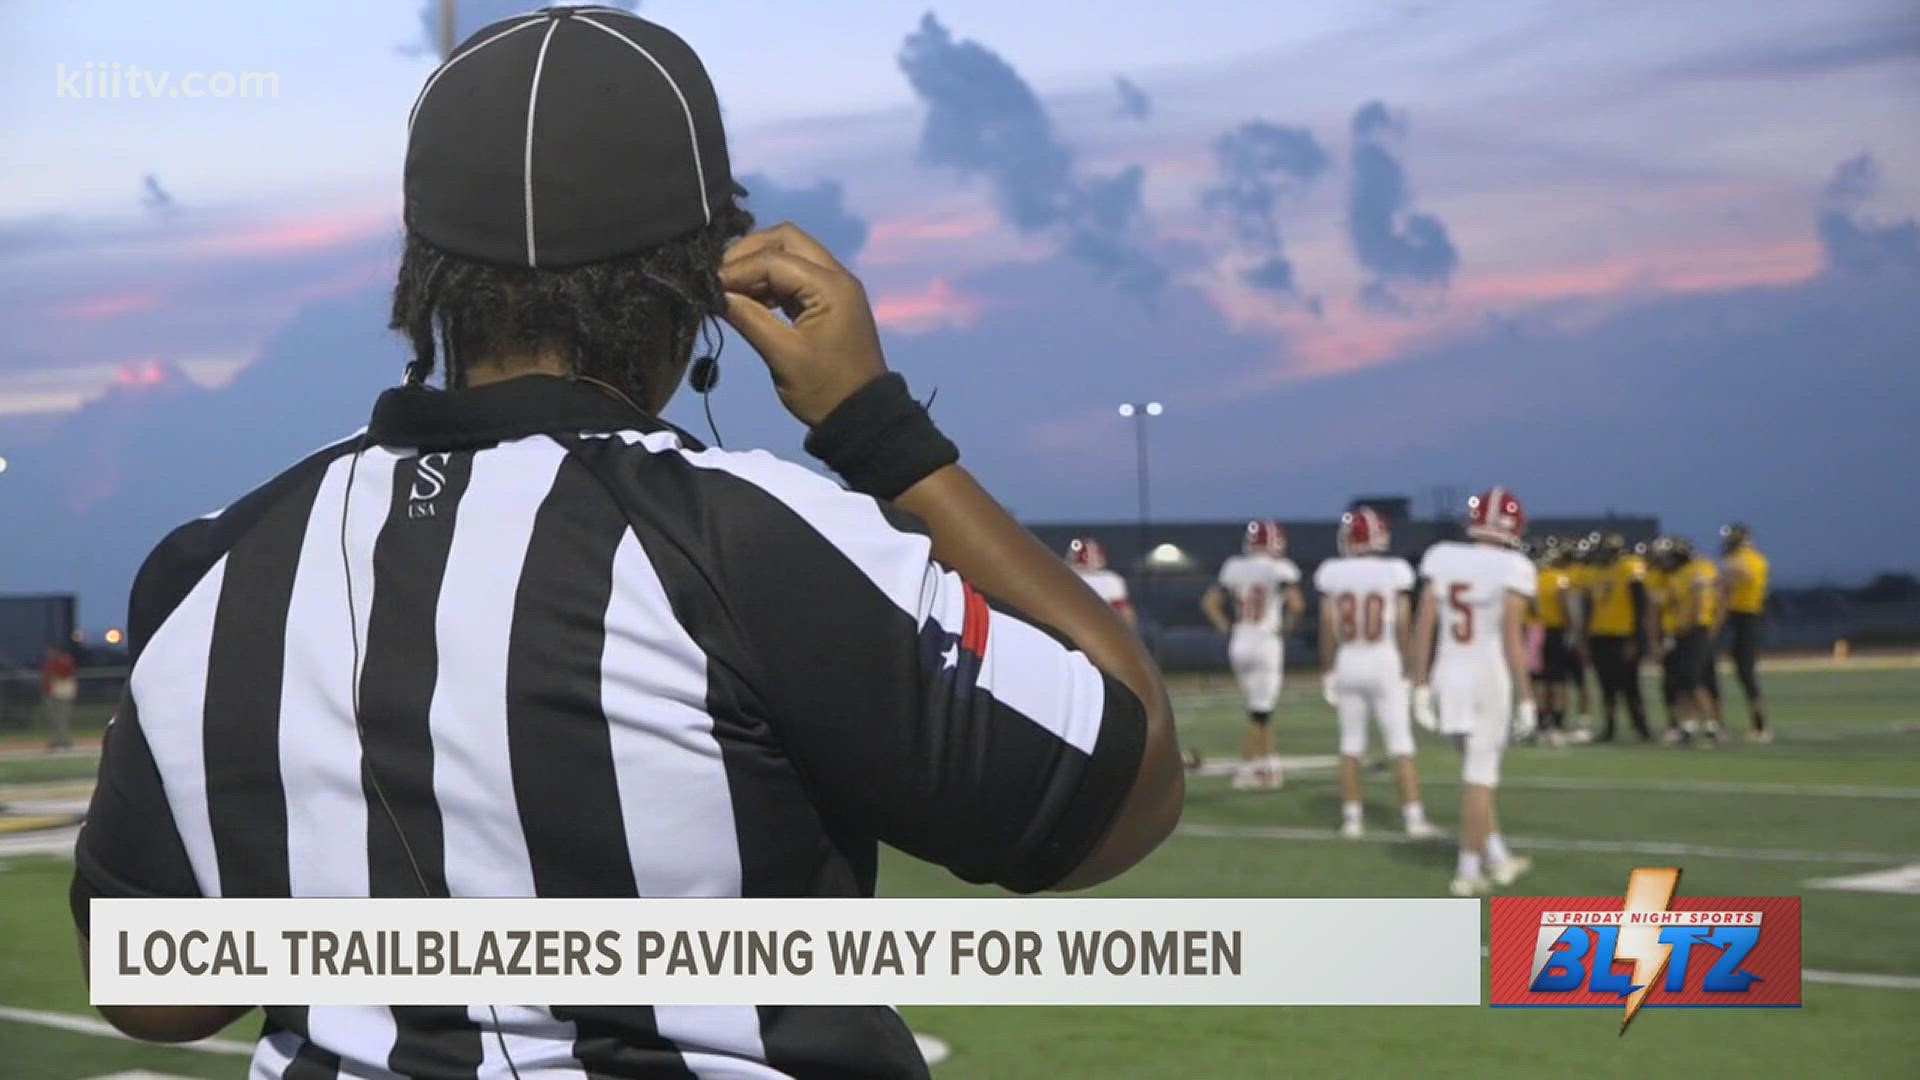 Local trailblazers paving way for women in sports